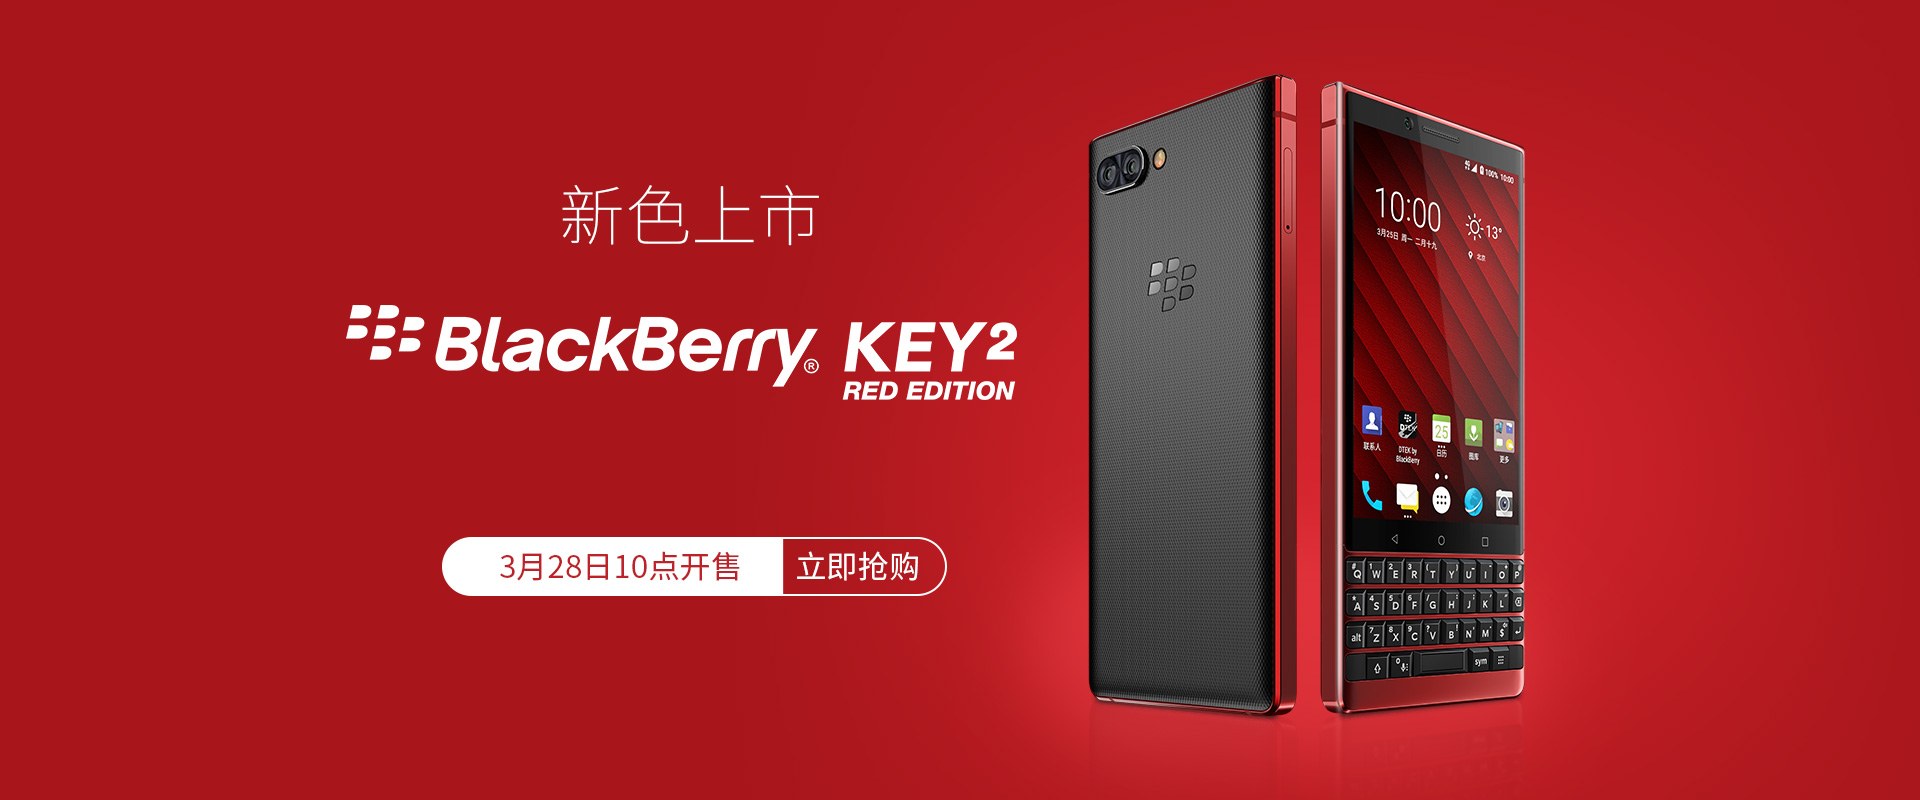 KEY2 Red Edition